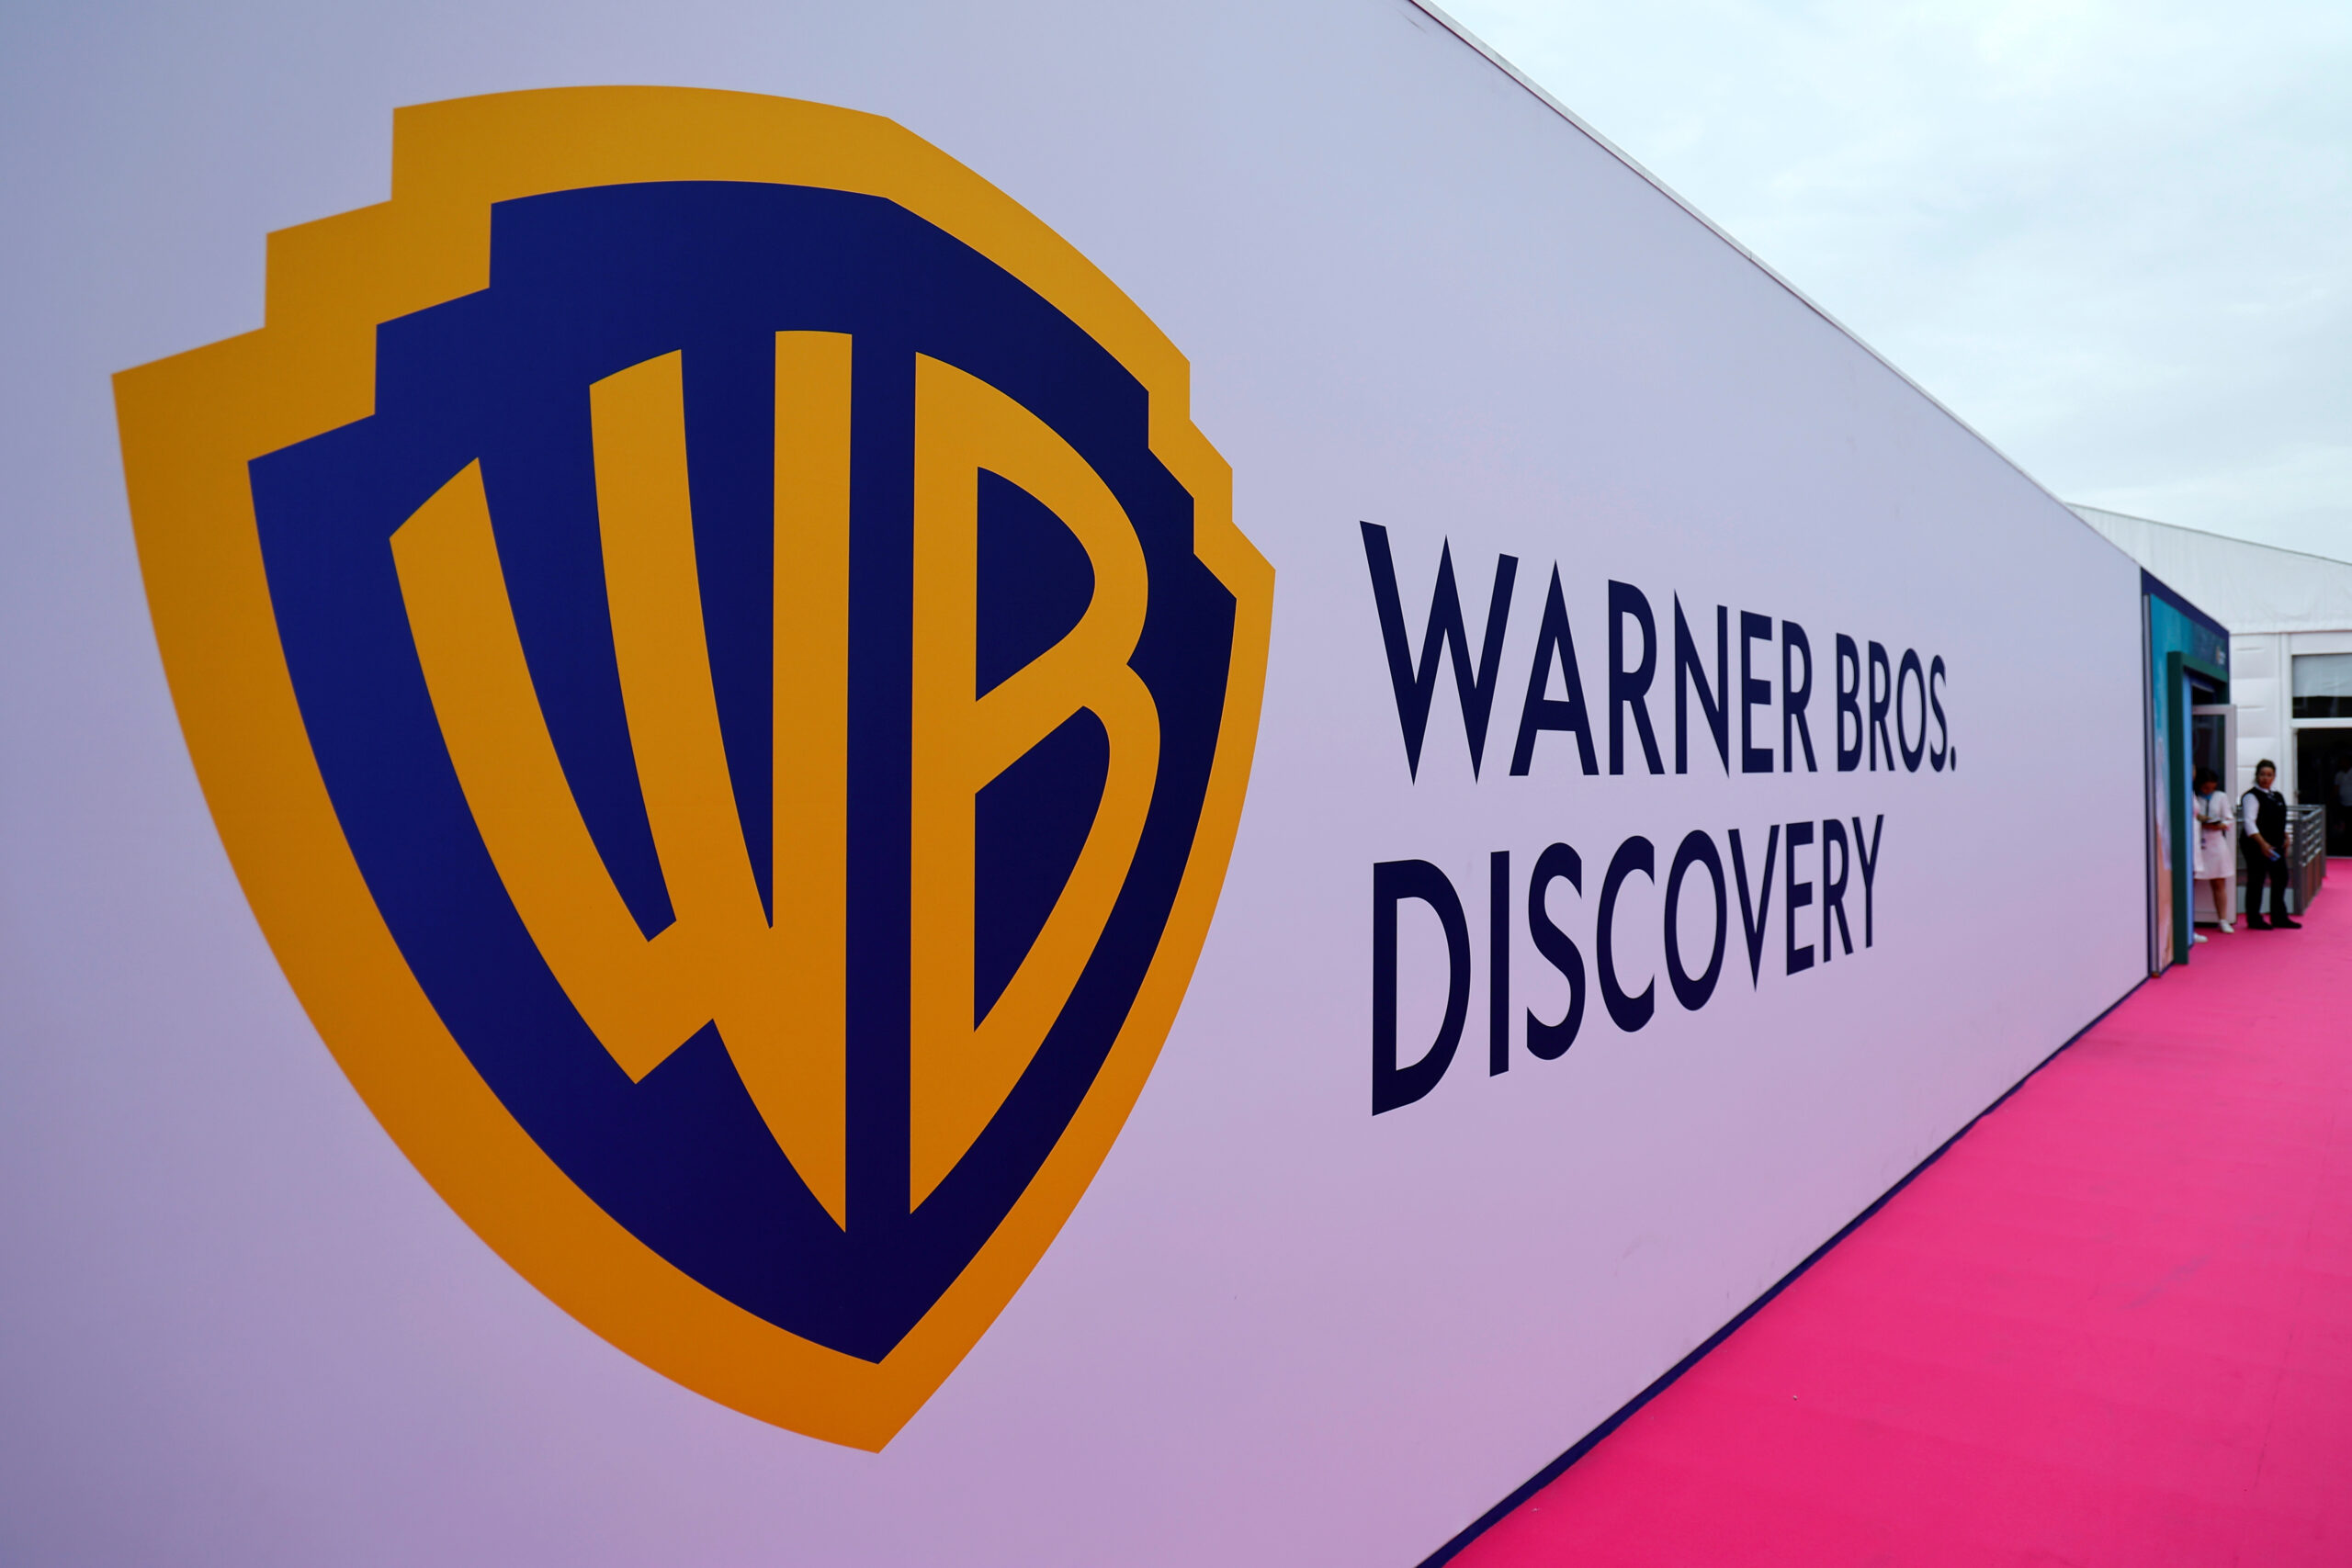  The Warner Bros logo is seen during the Cannes Lions International Festival of Creativity in Cannes, France, June 22, 2022.    REUTERS/Eric Gaillard